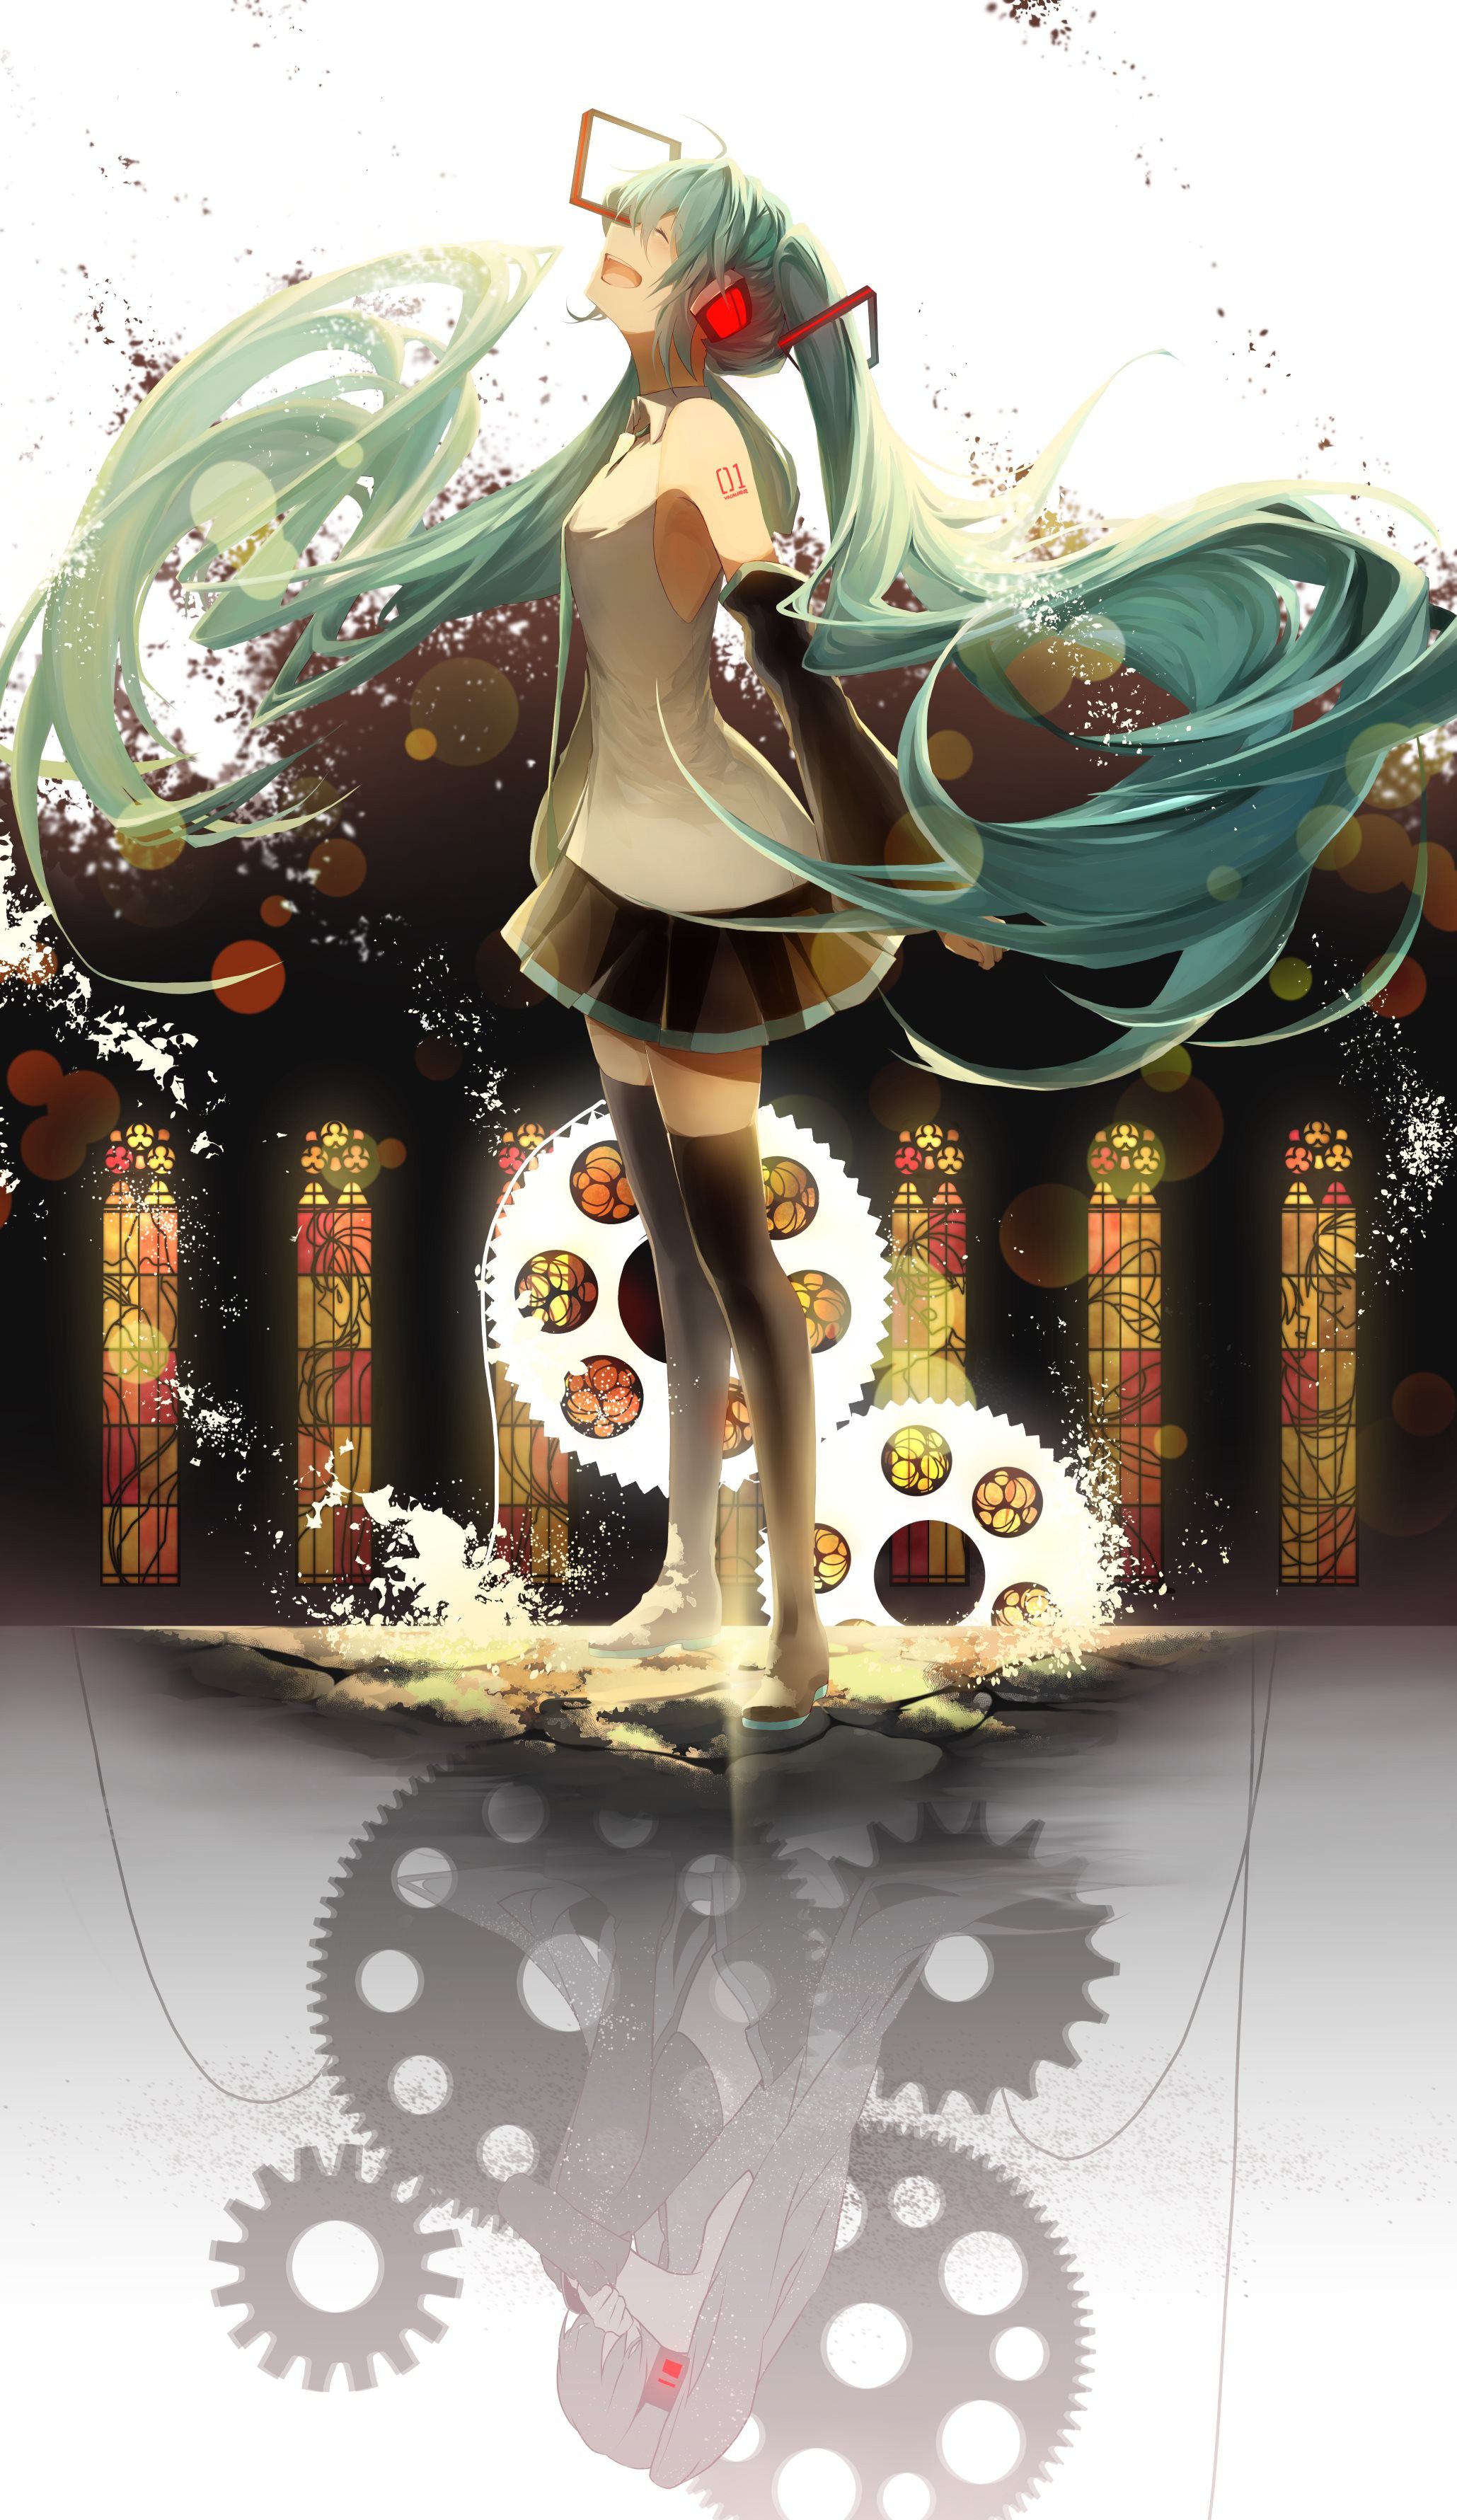 Hatsune miku is cute! Beautiful! With 10 images of miku! [Pictures and wallpapers] (Vocaloid VOCALOID 11) 5